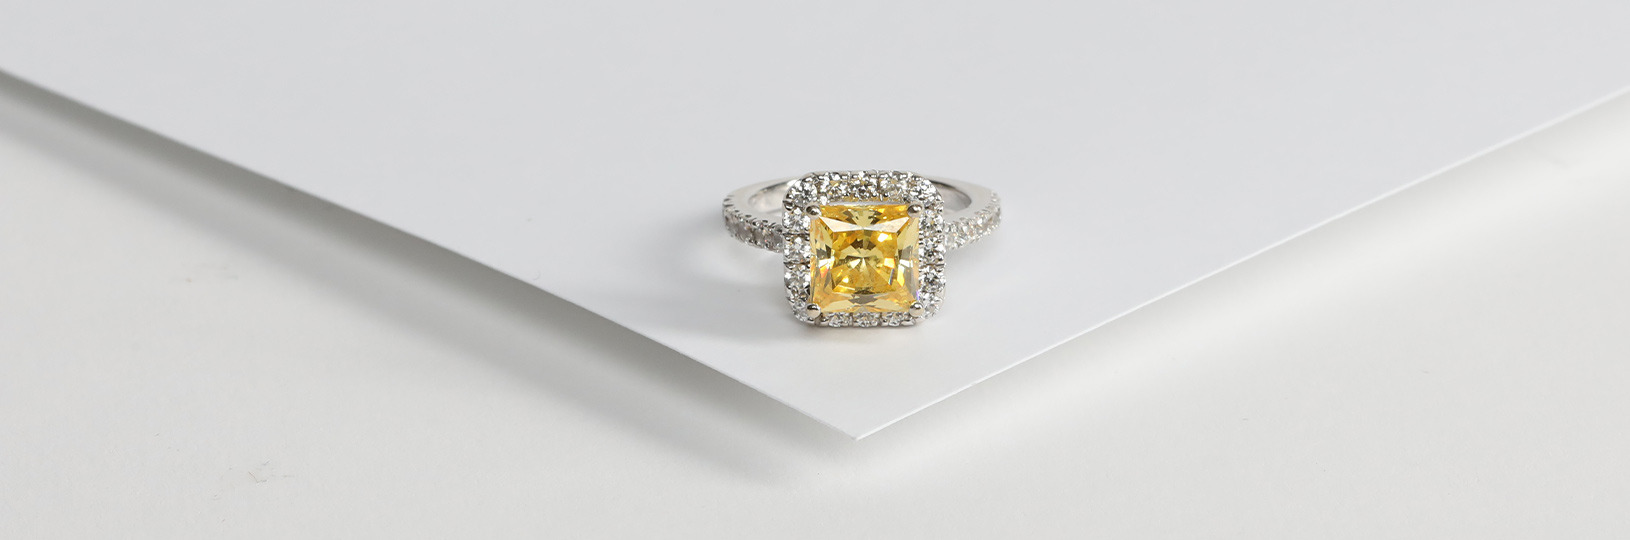 Canary engagement ring.